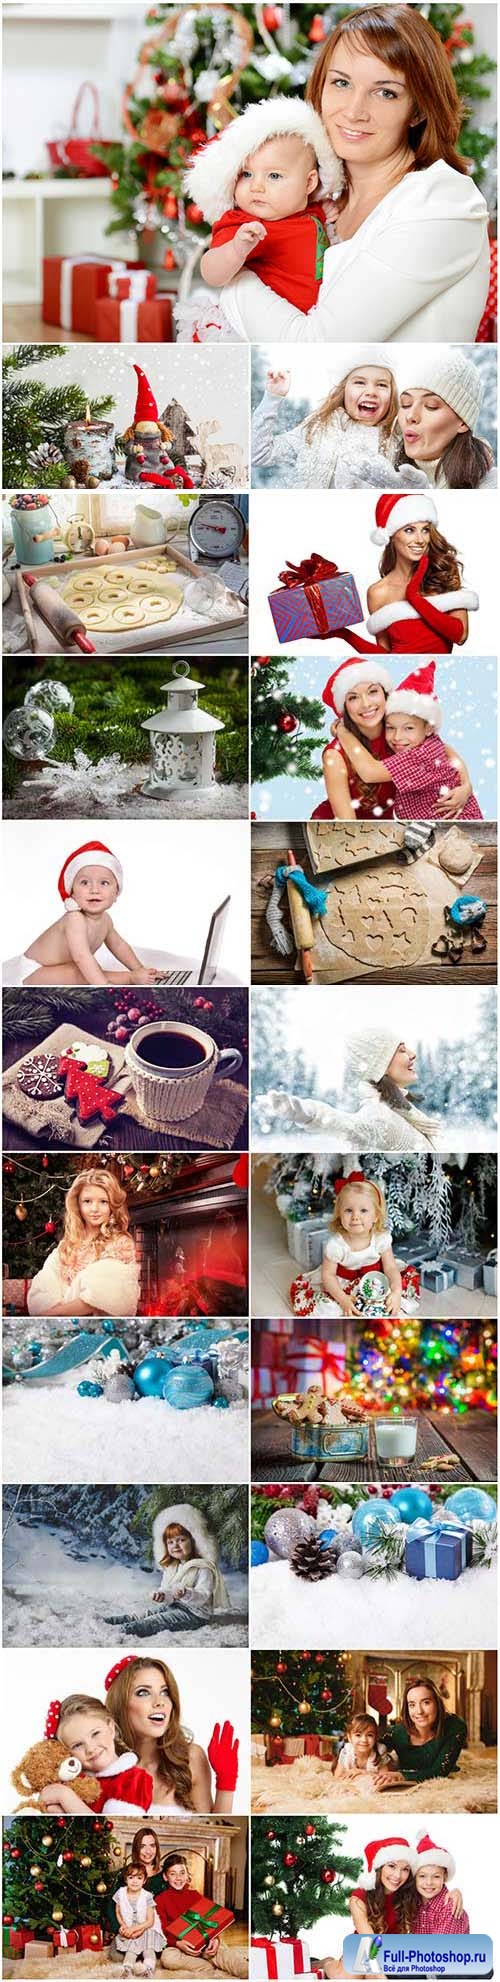 New Year and Christmas stock photos 89